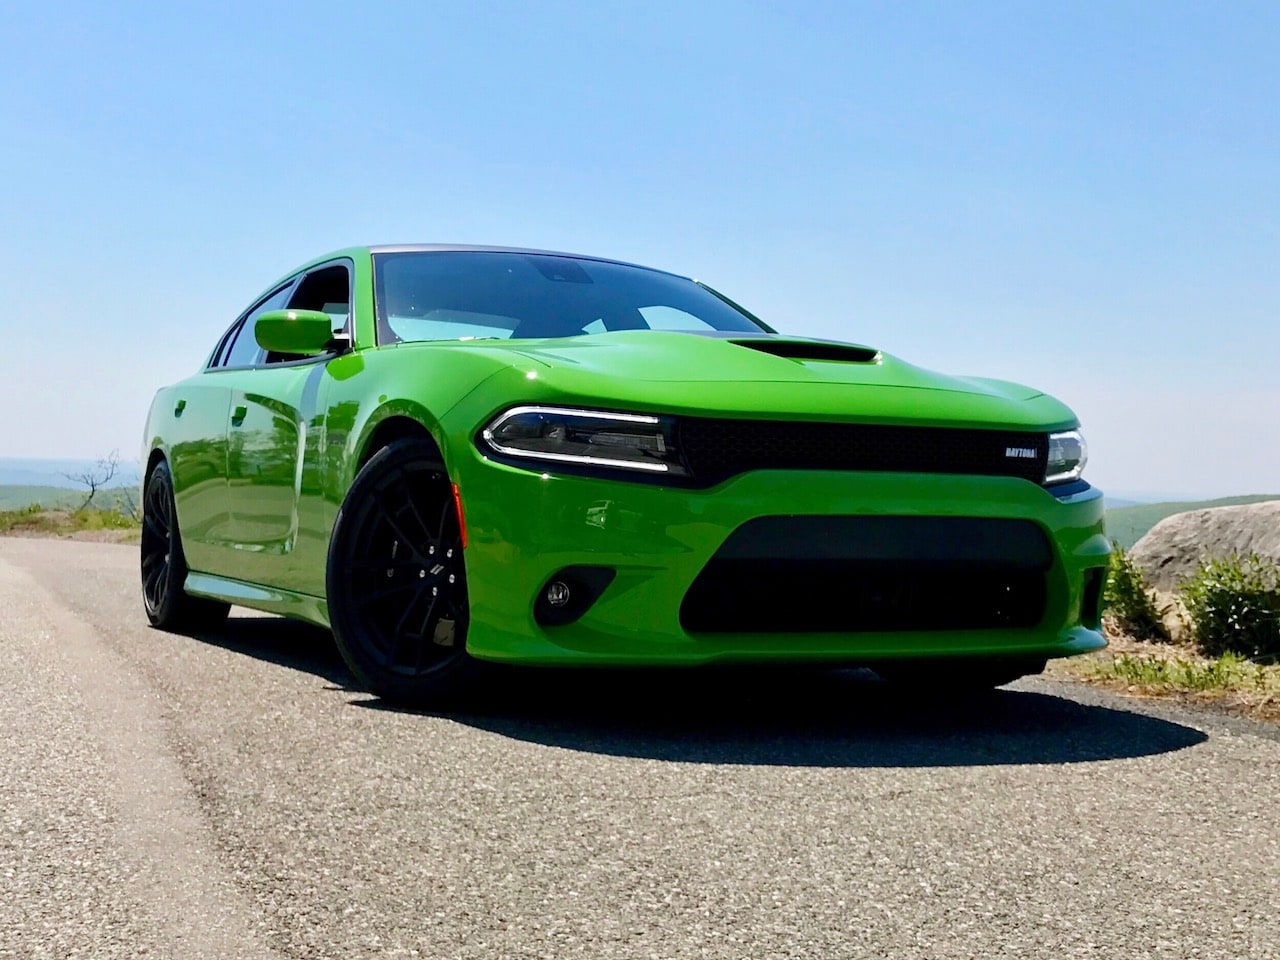 Exterior view of the 2018 Dodge Charger Daytona 392